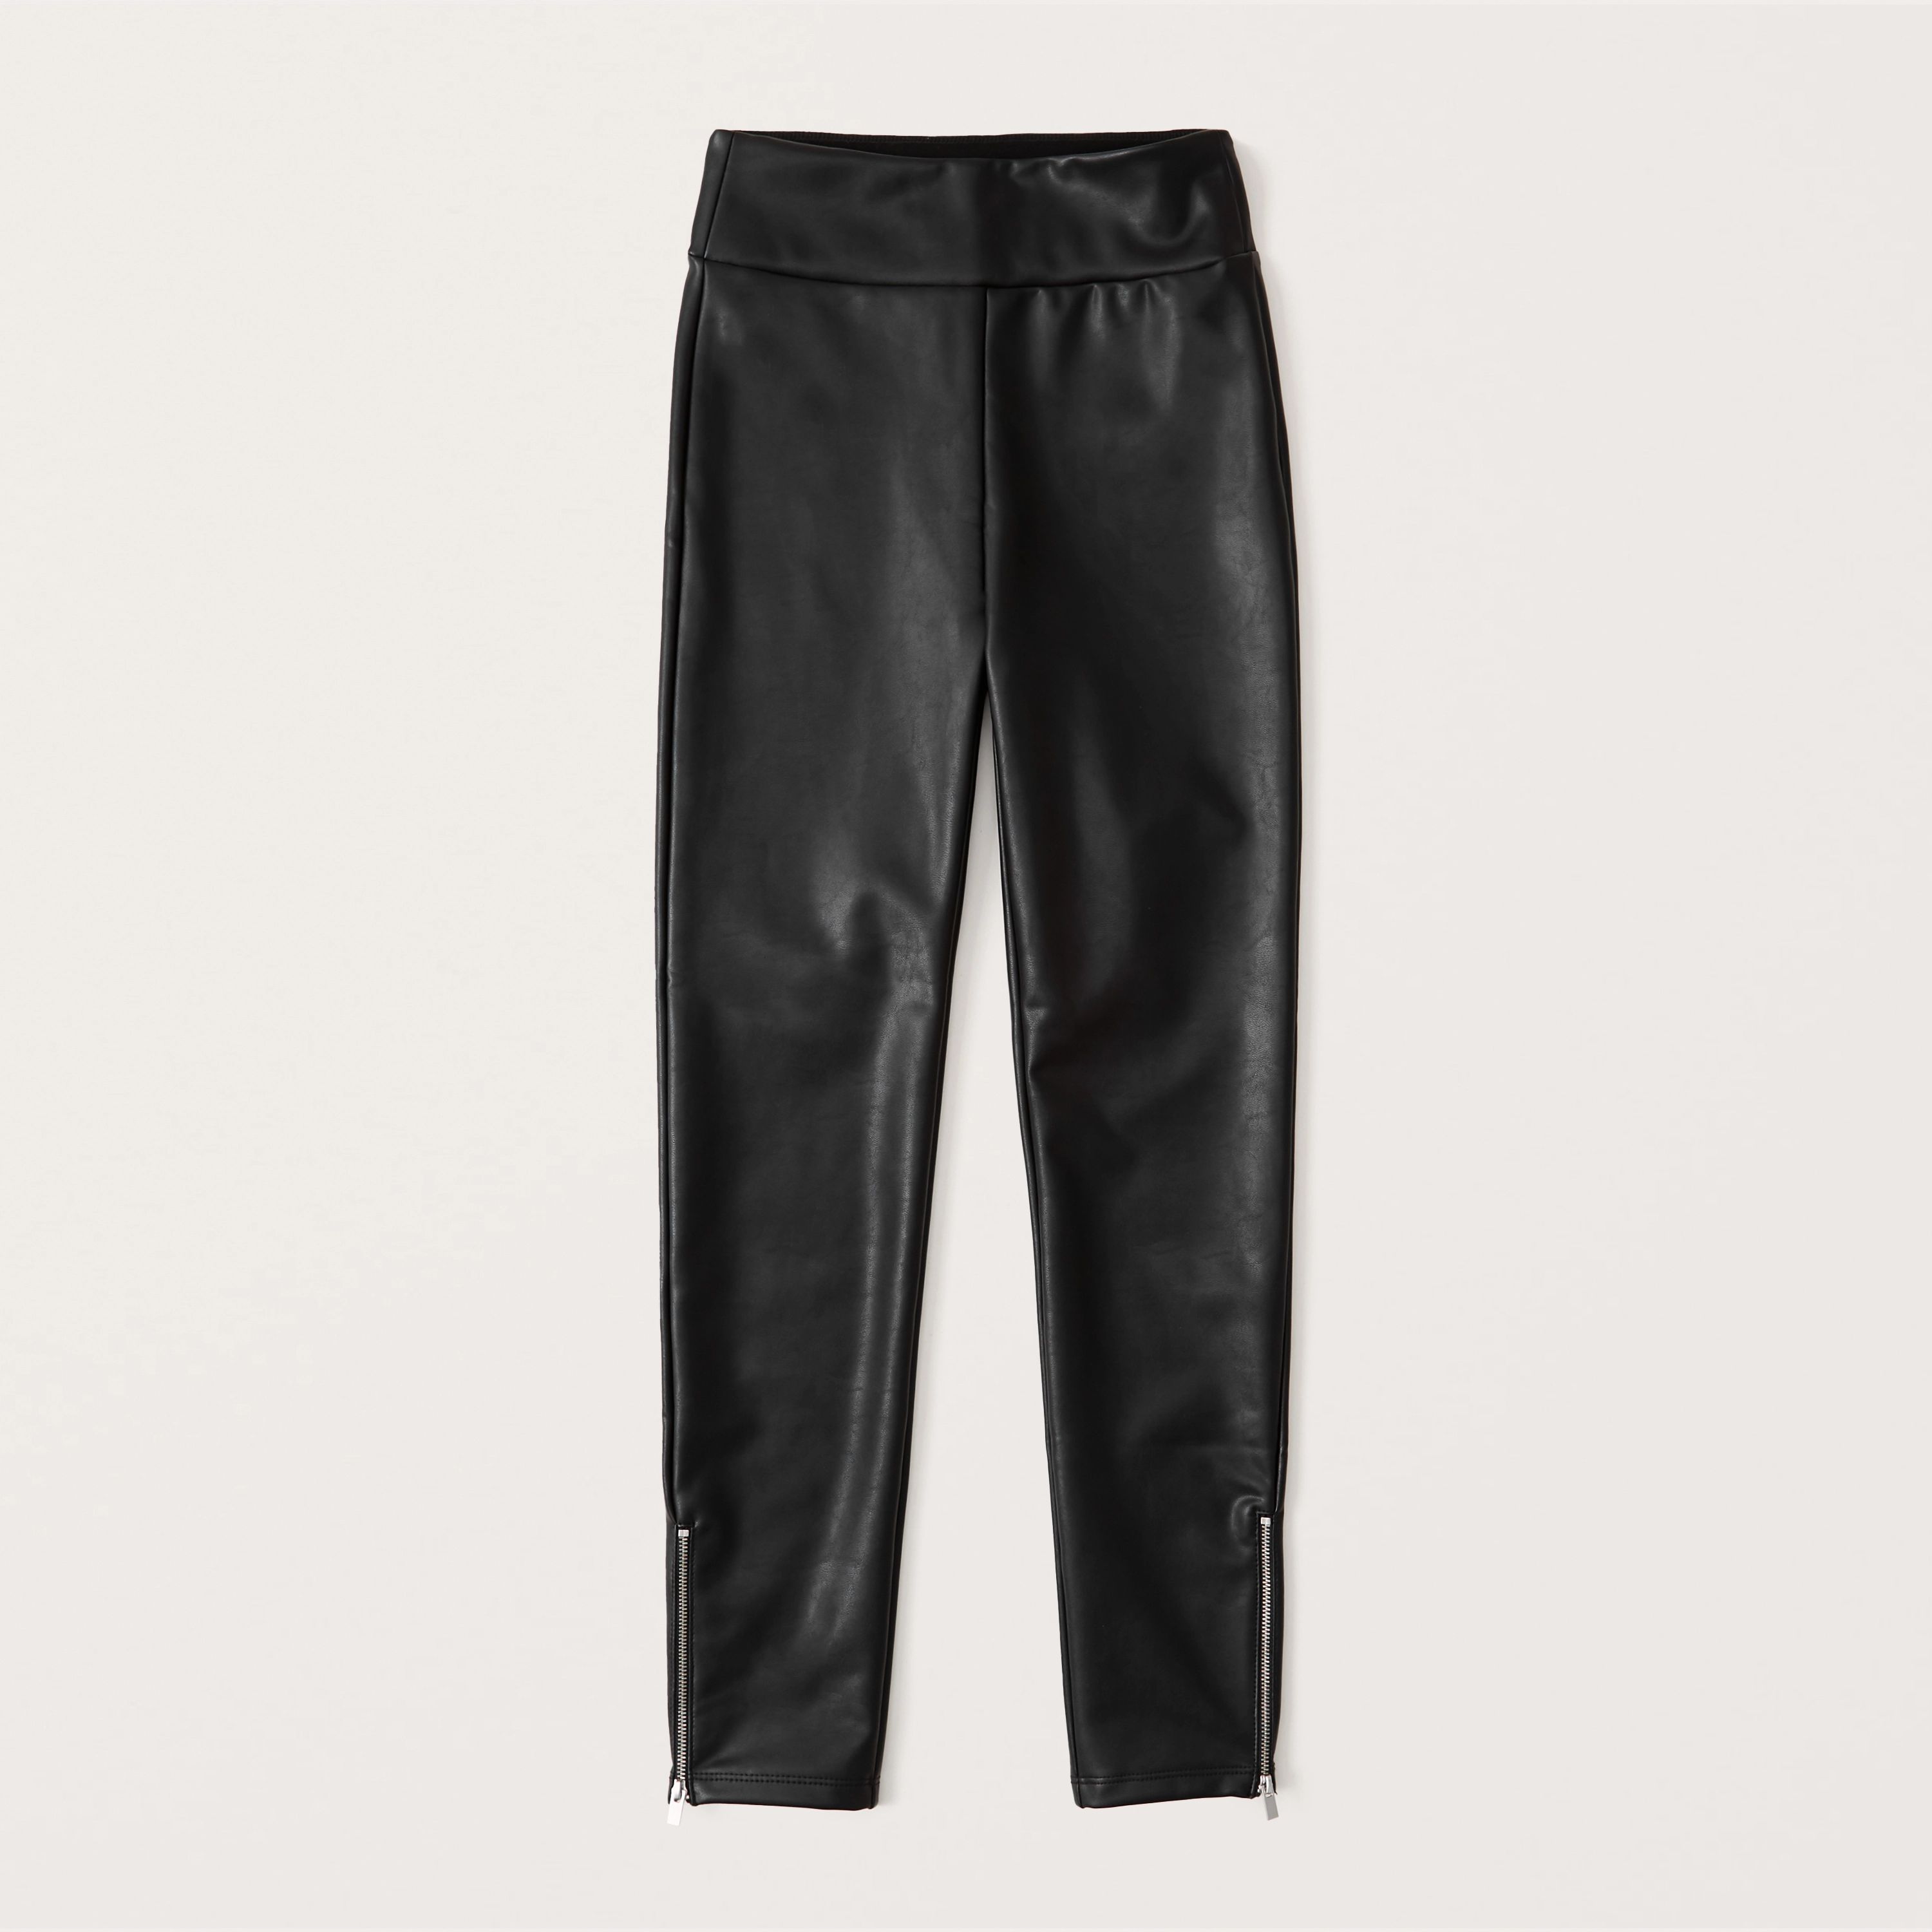 96 Hours Collection
			


  
						
							Vegan Leather Zip-Ankle Leggings
						
					



		
	
... | Abercrombie & Fitch (US)